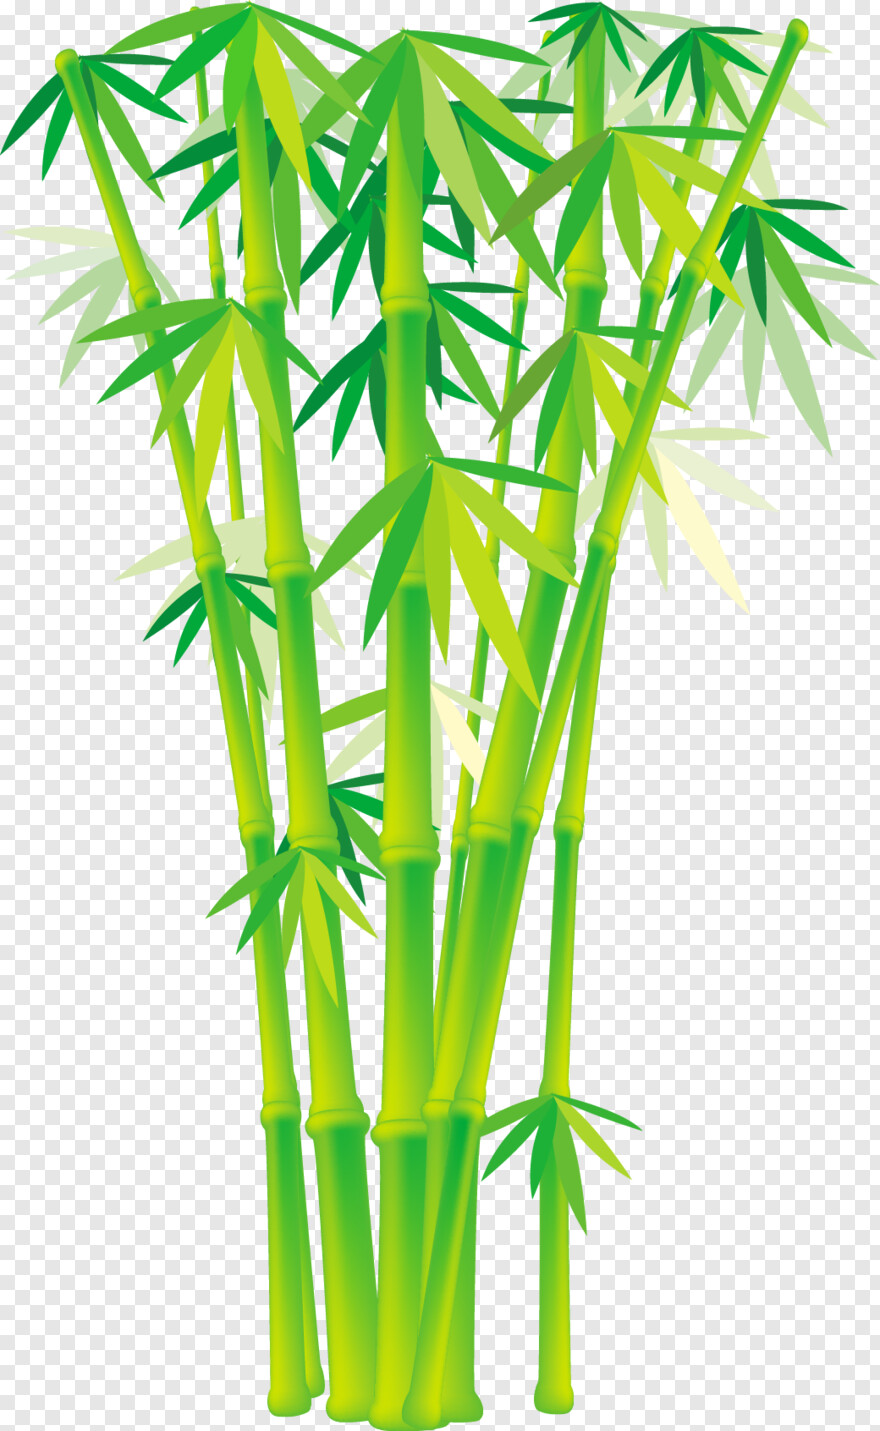  Bamboo, House Plant, Bamboo Frame, Potted Plant, Green Grass, Vine Plant